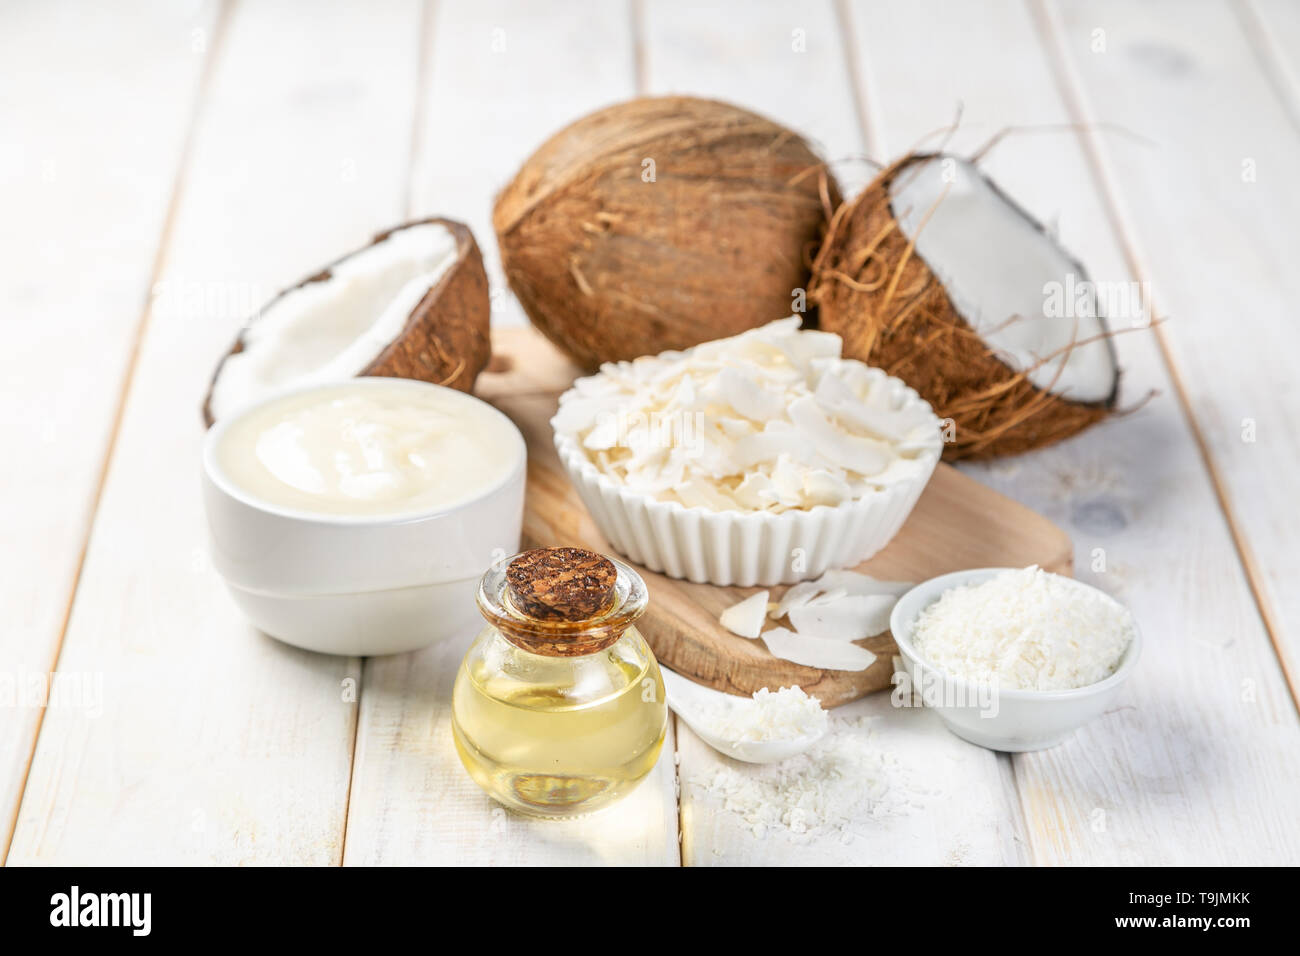 MCT coconut oil concept - coconuts, butter and oil on wood background Stock Photo